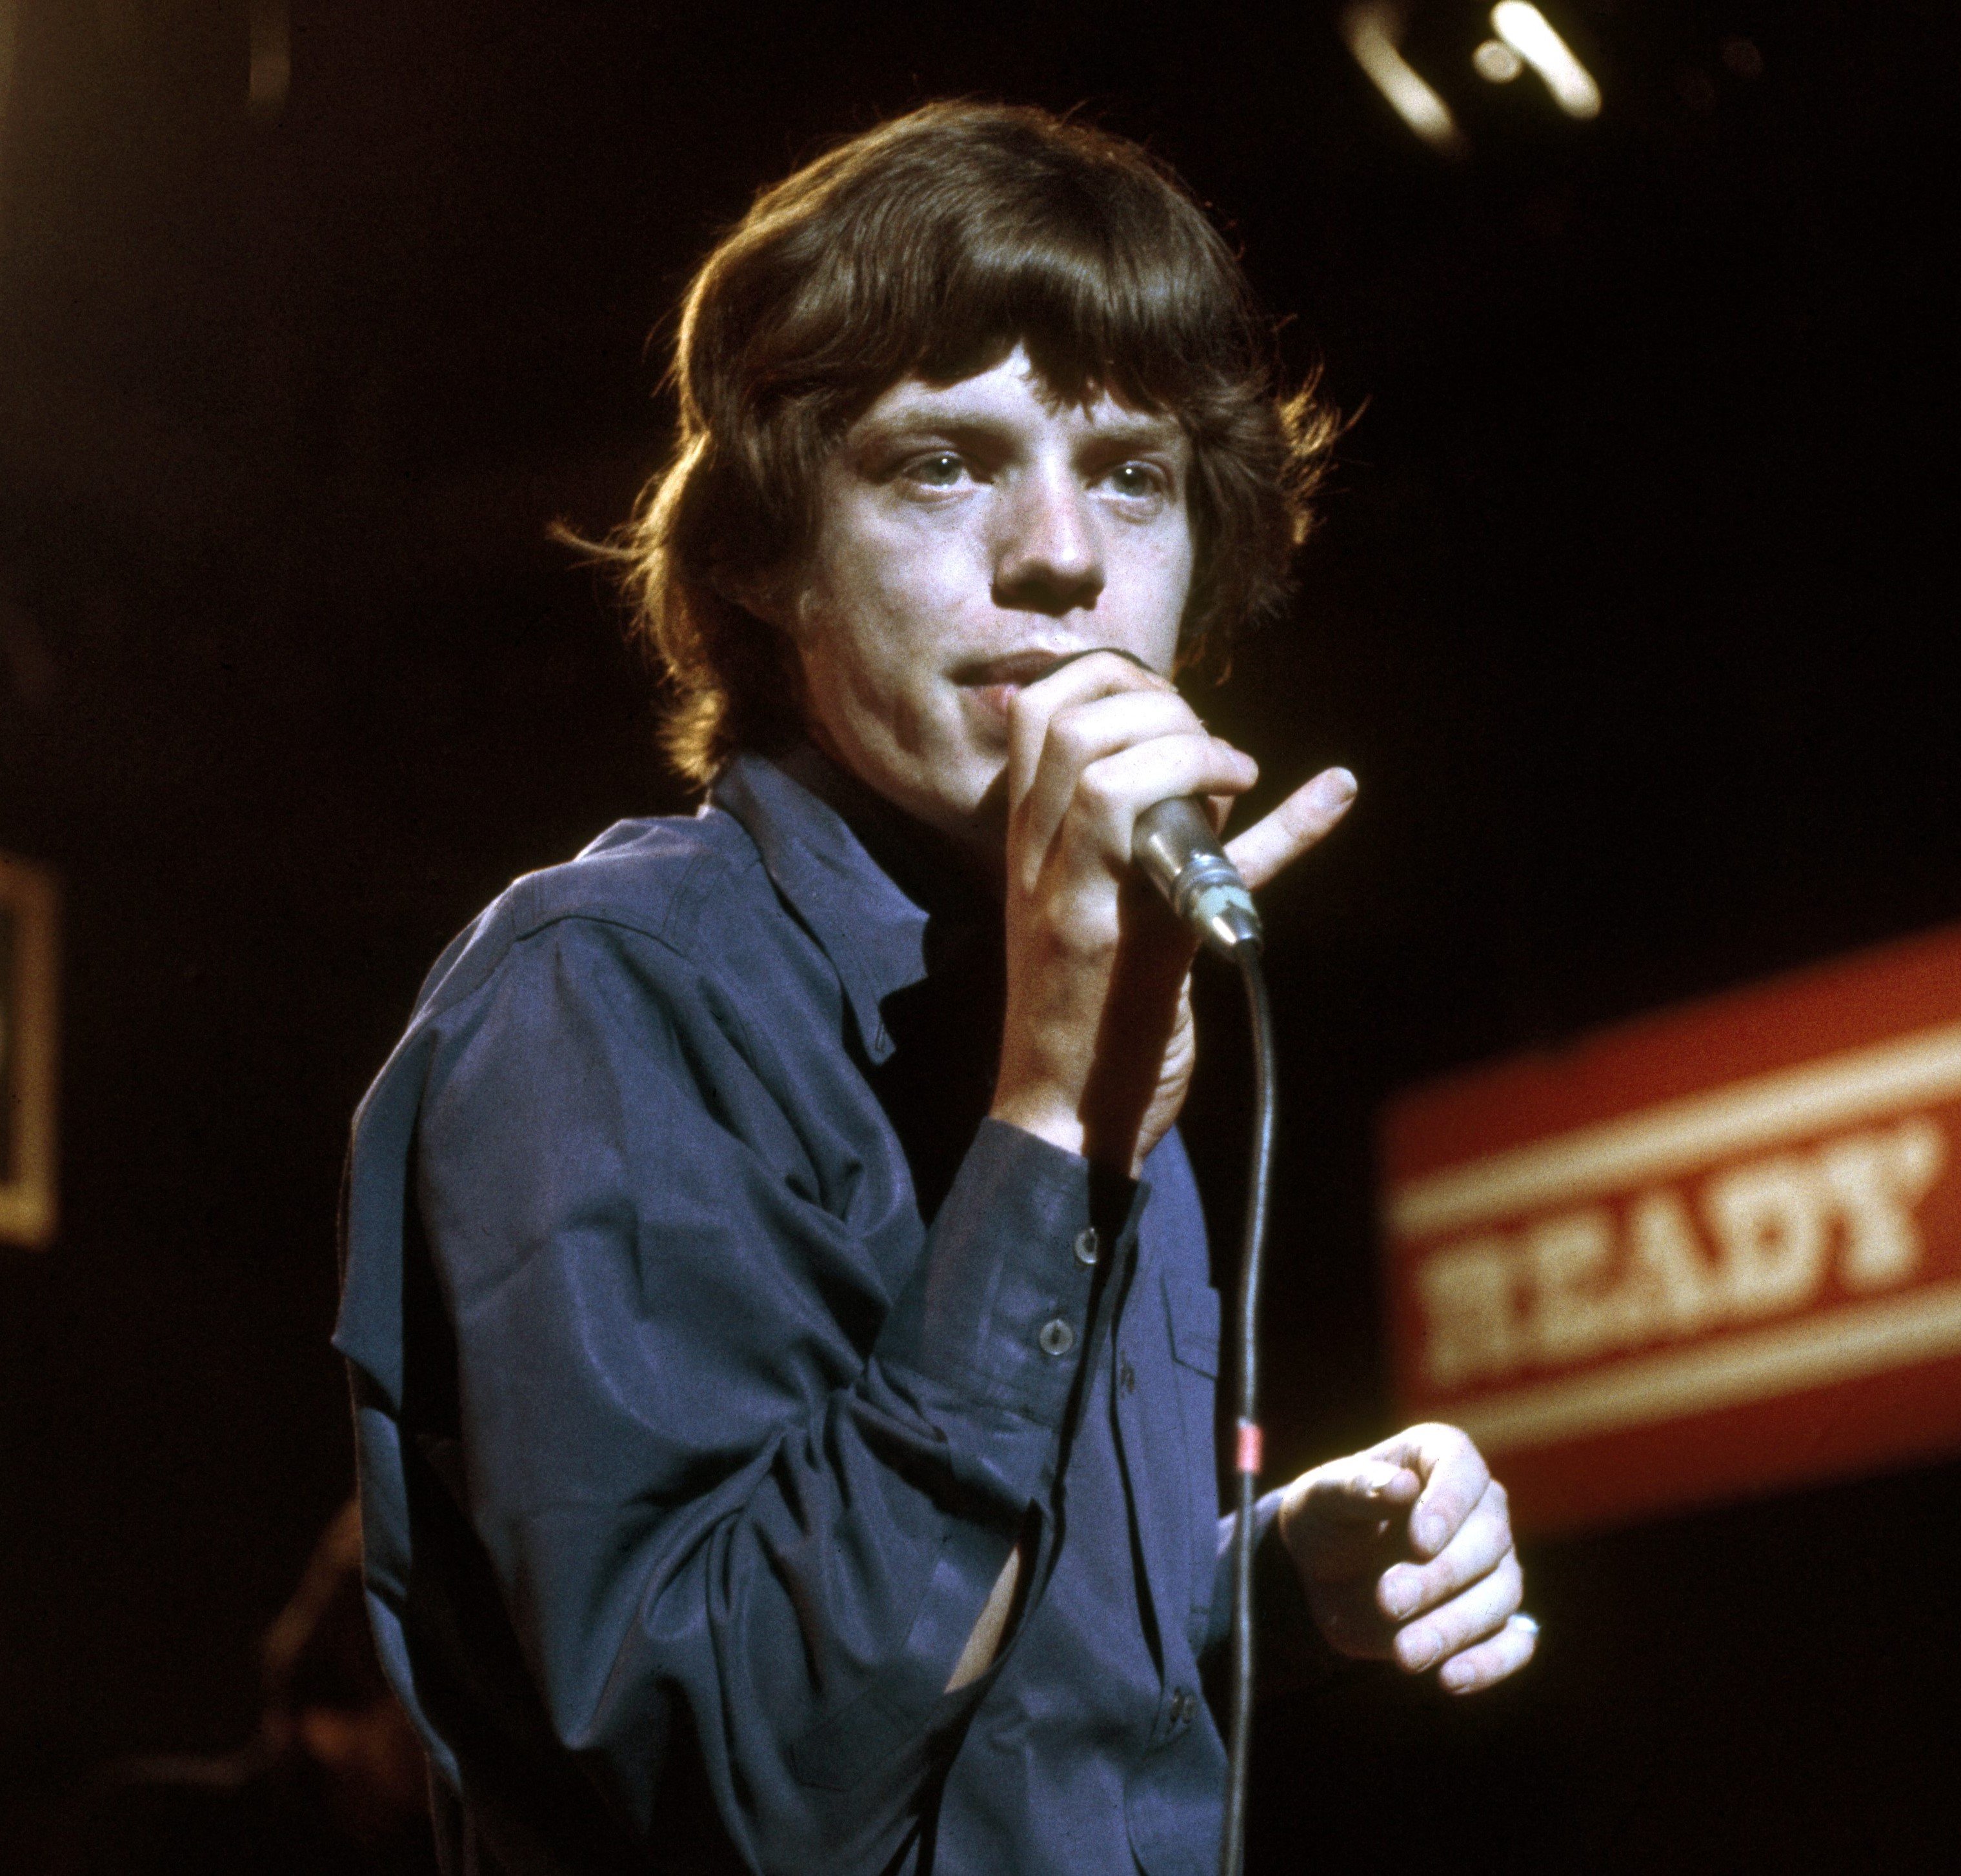 Mick Jagger with a microphone during The Rolling Stones' "Wild Horses" era